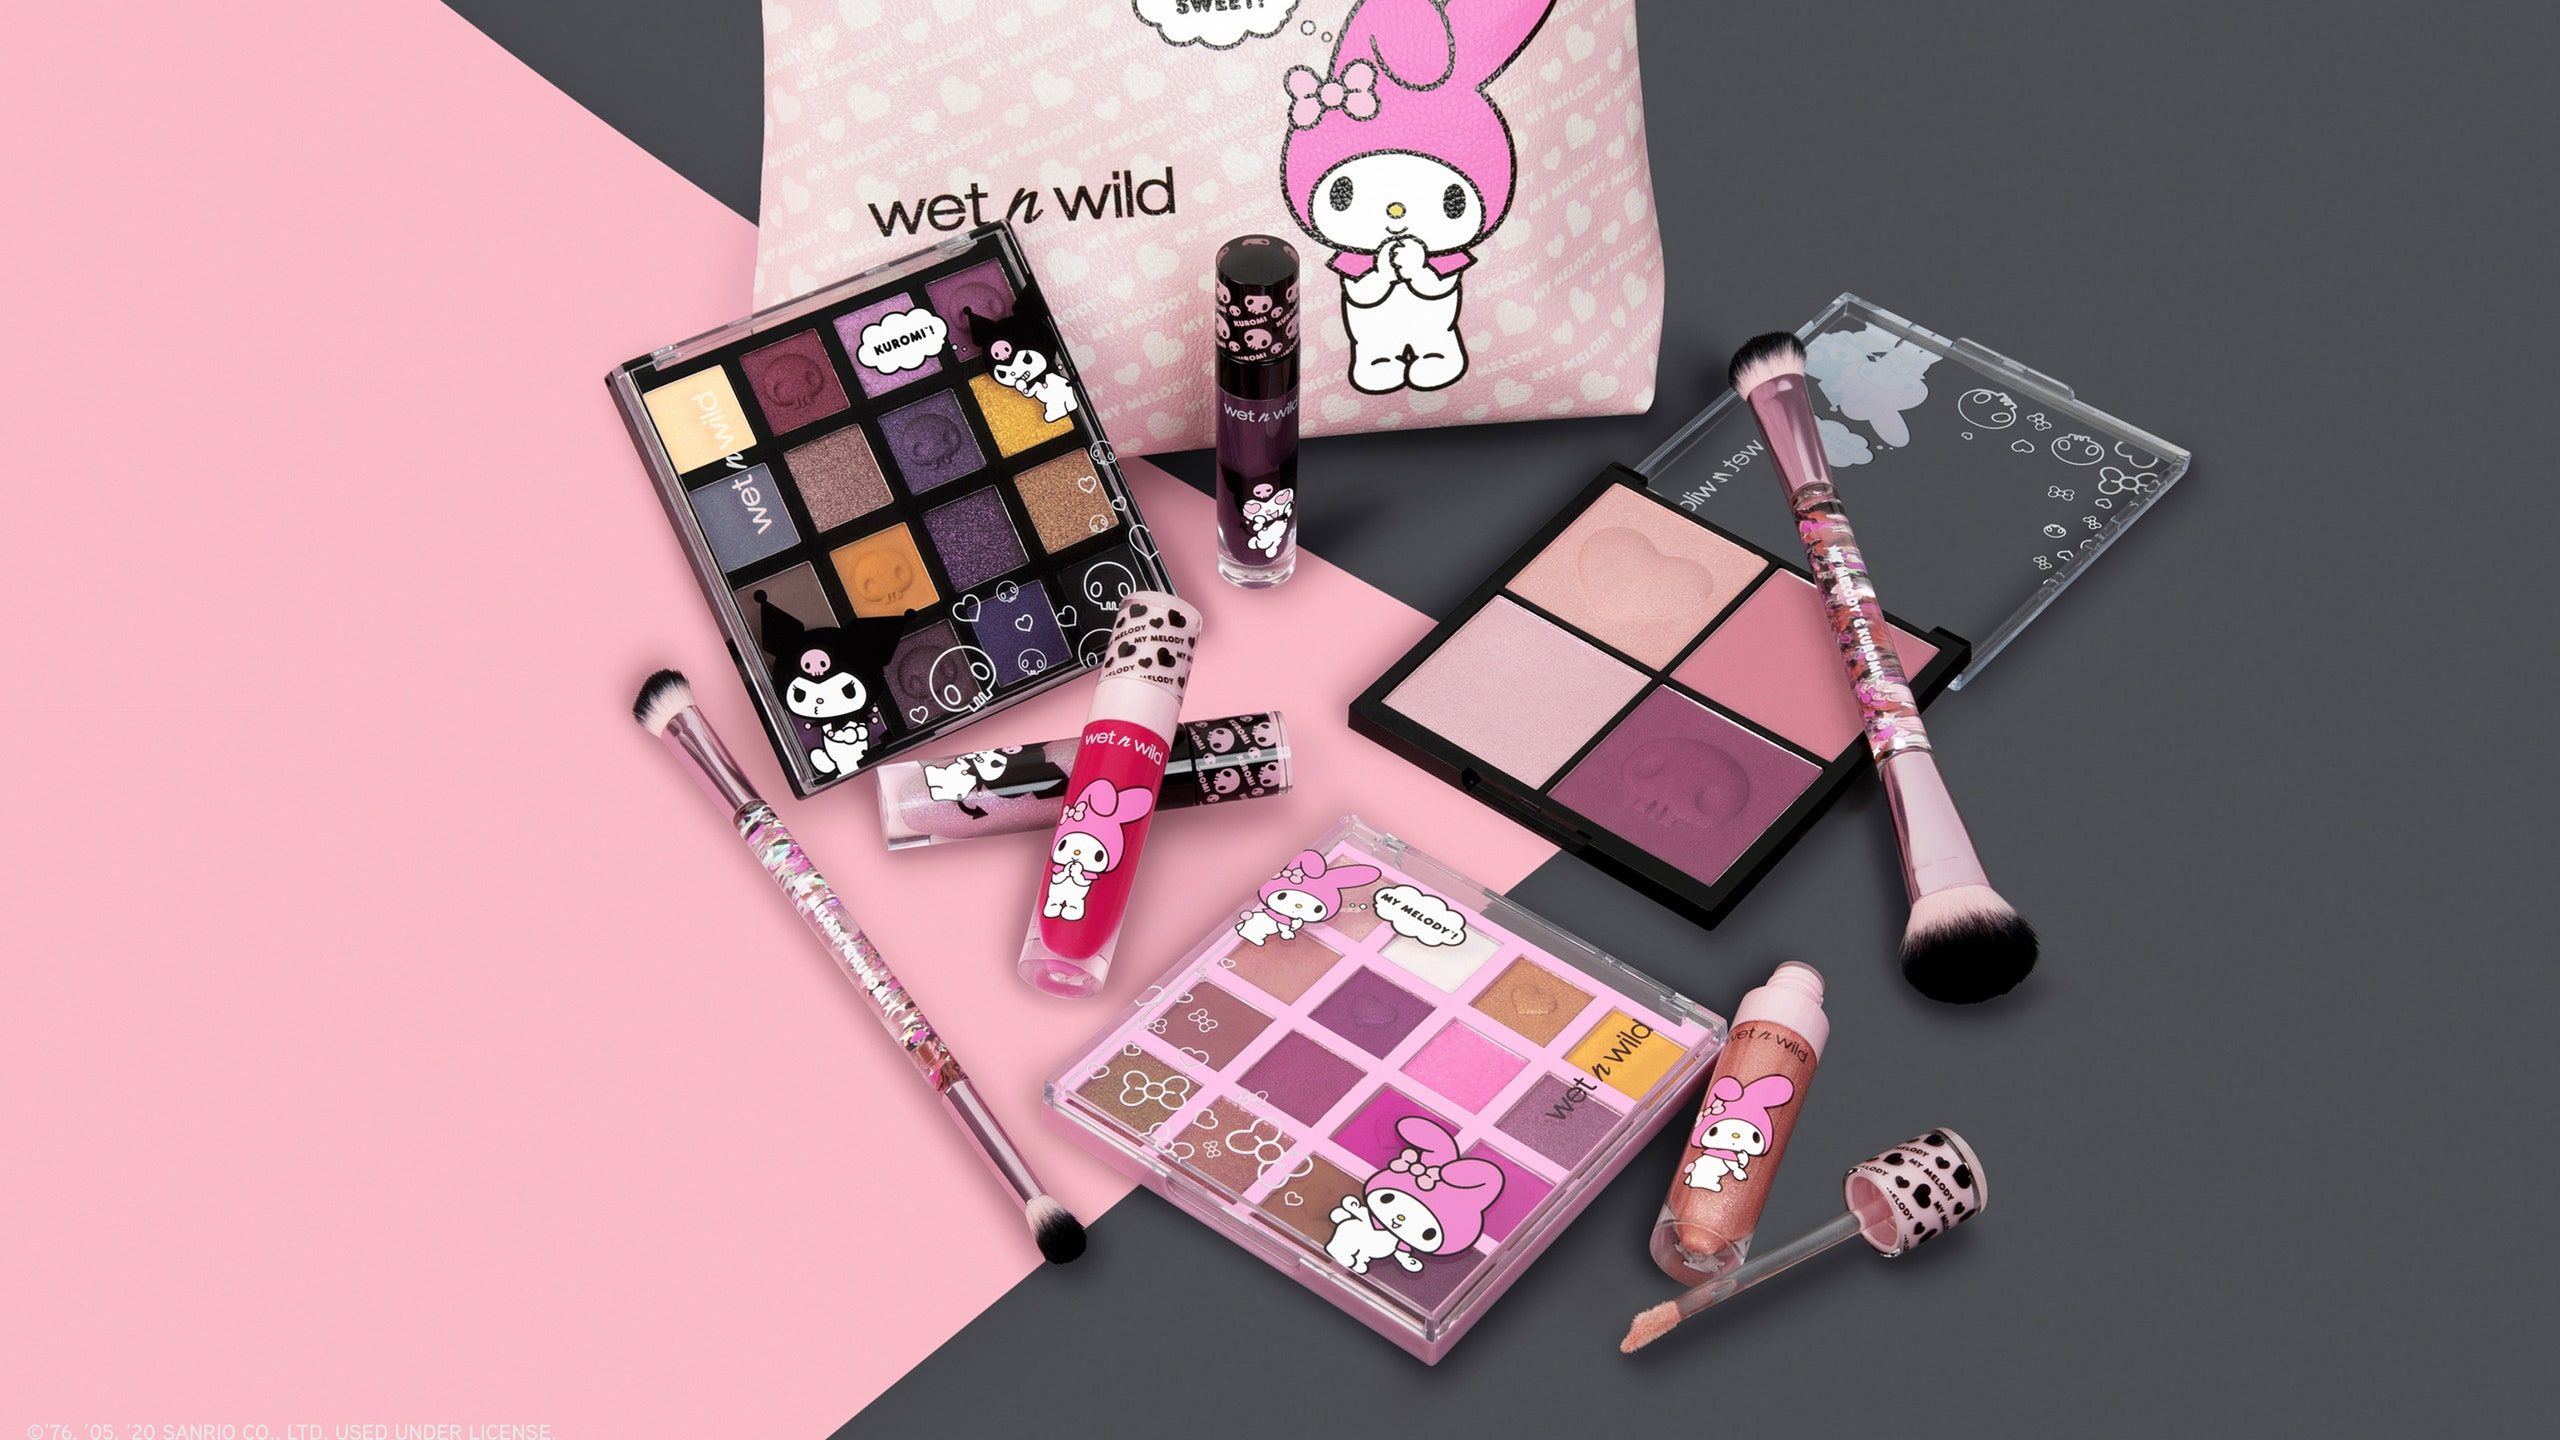 Wet n Wild Launches Sanrio Collection With My Melody and Kirumo Characters